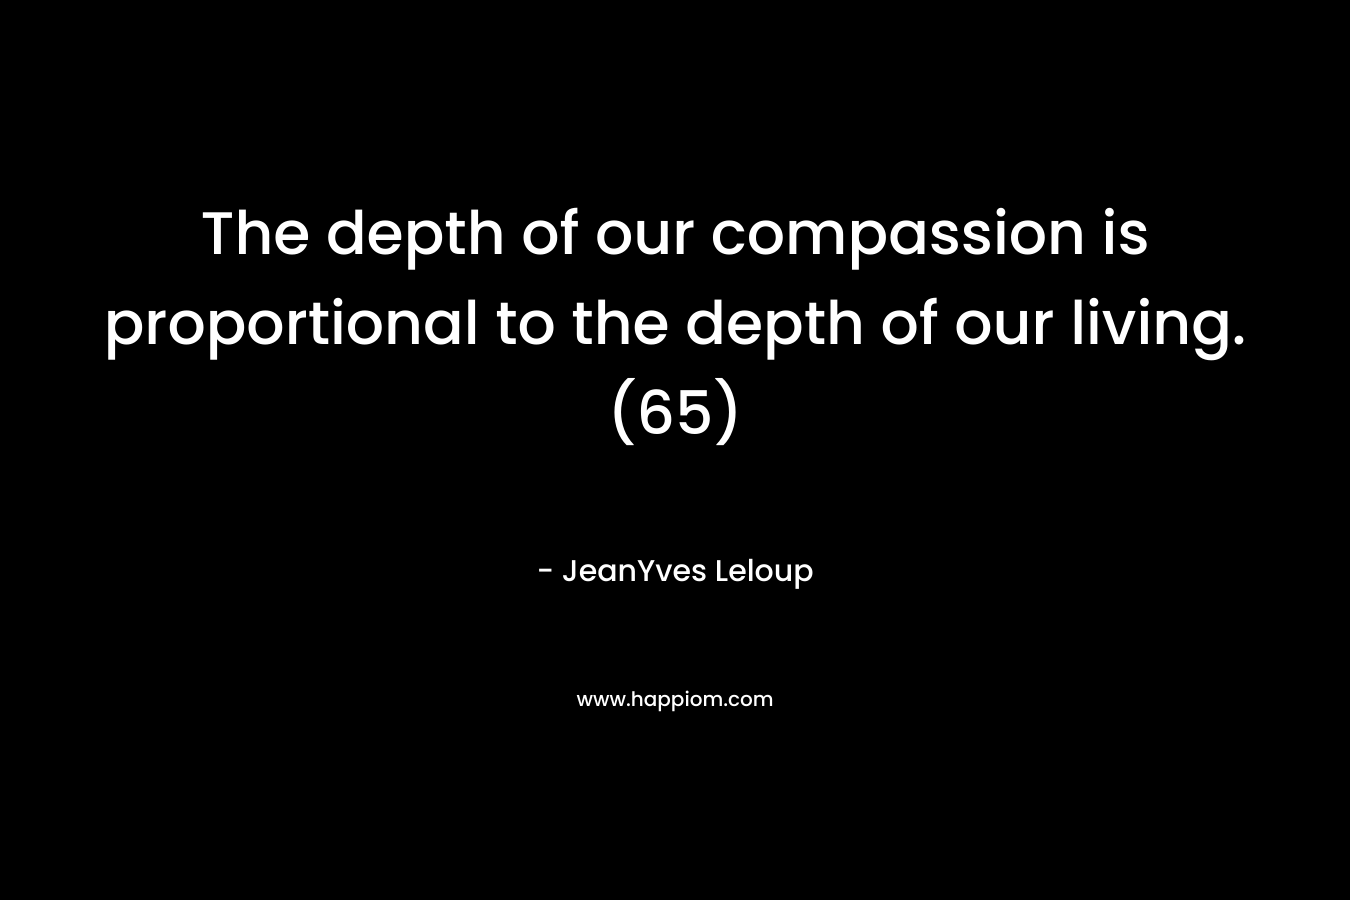 The depth of our compassion is proportional to the depth of our living. (65)